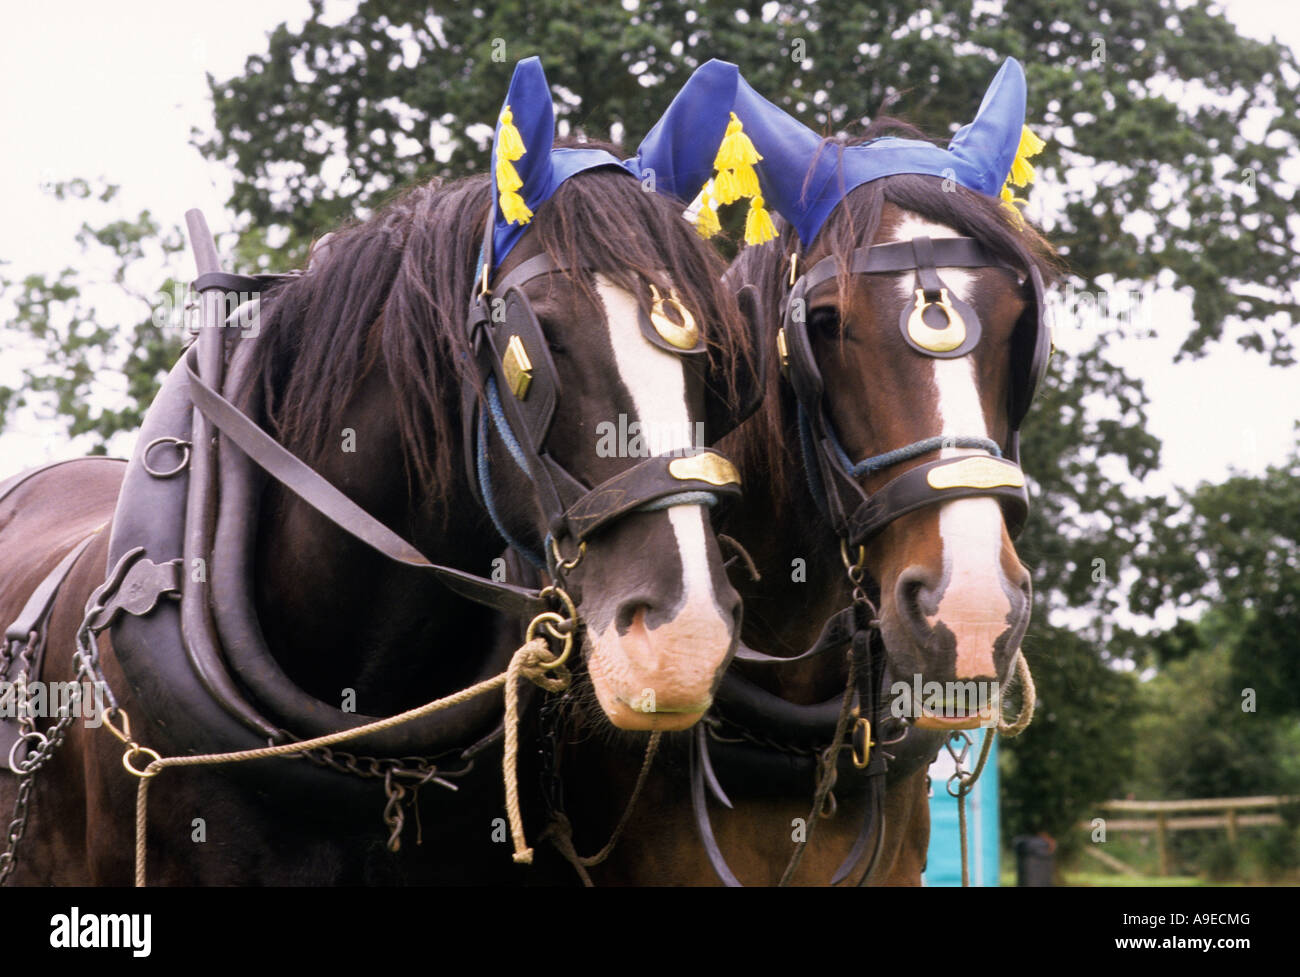 Shire Horses Brasses and Harness Stock Photo